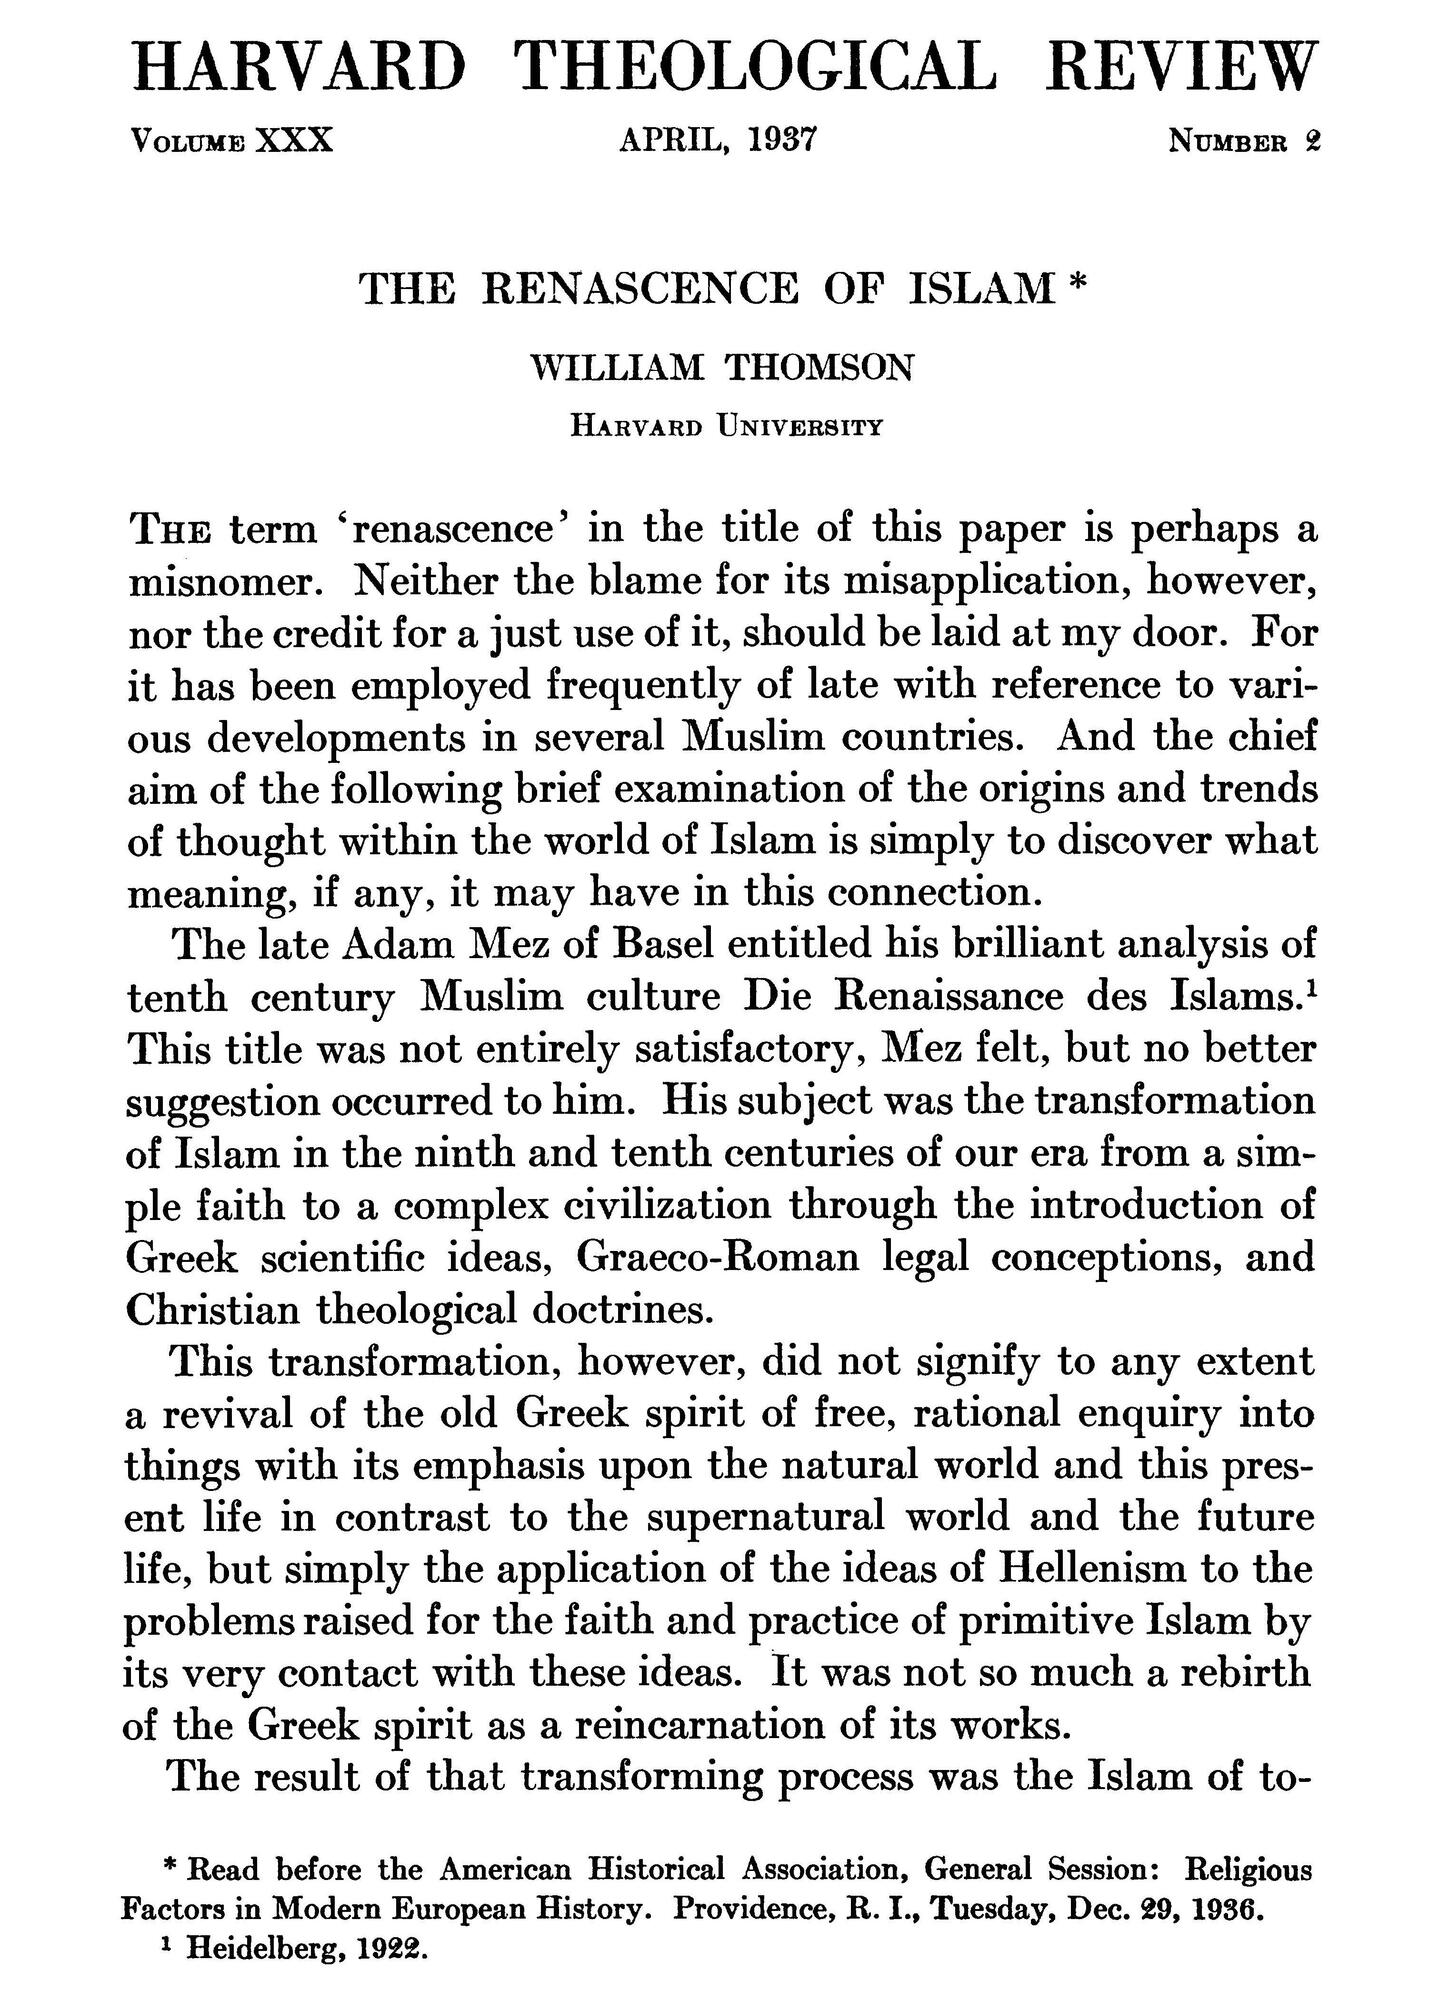 "The Renascence of Islam" by William Thomson